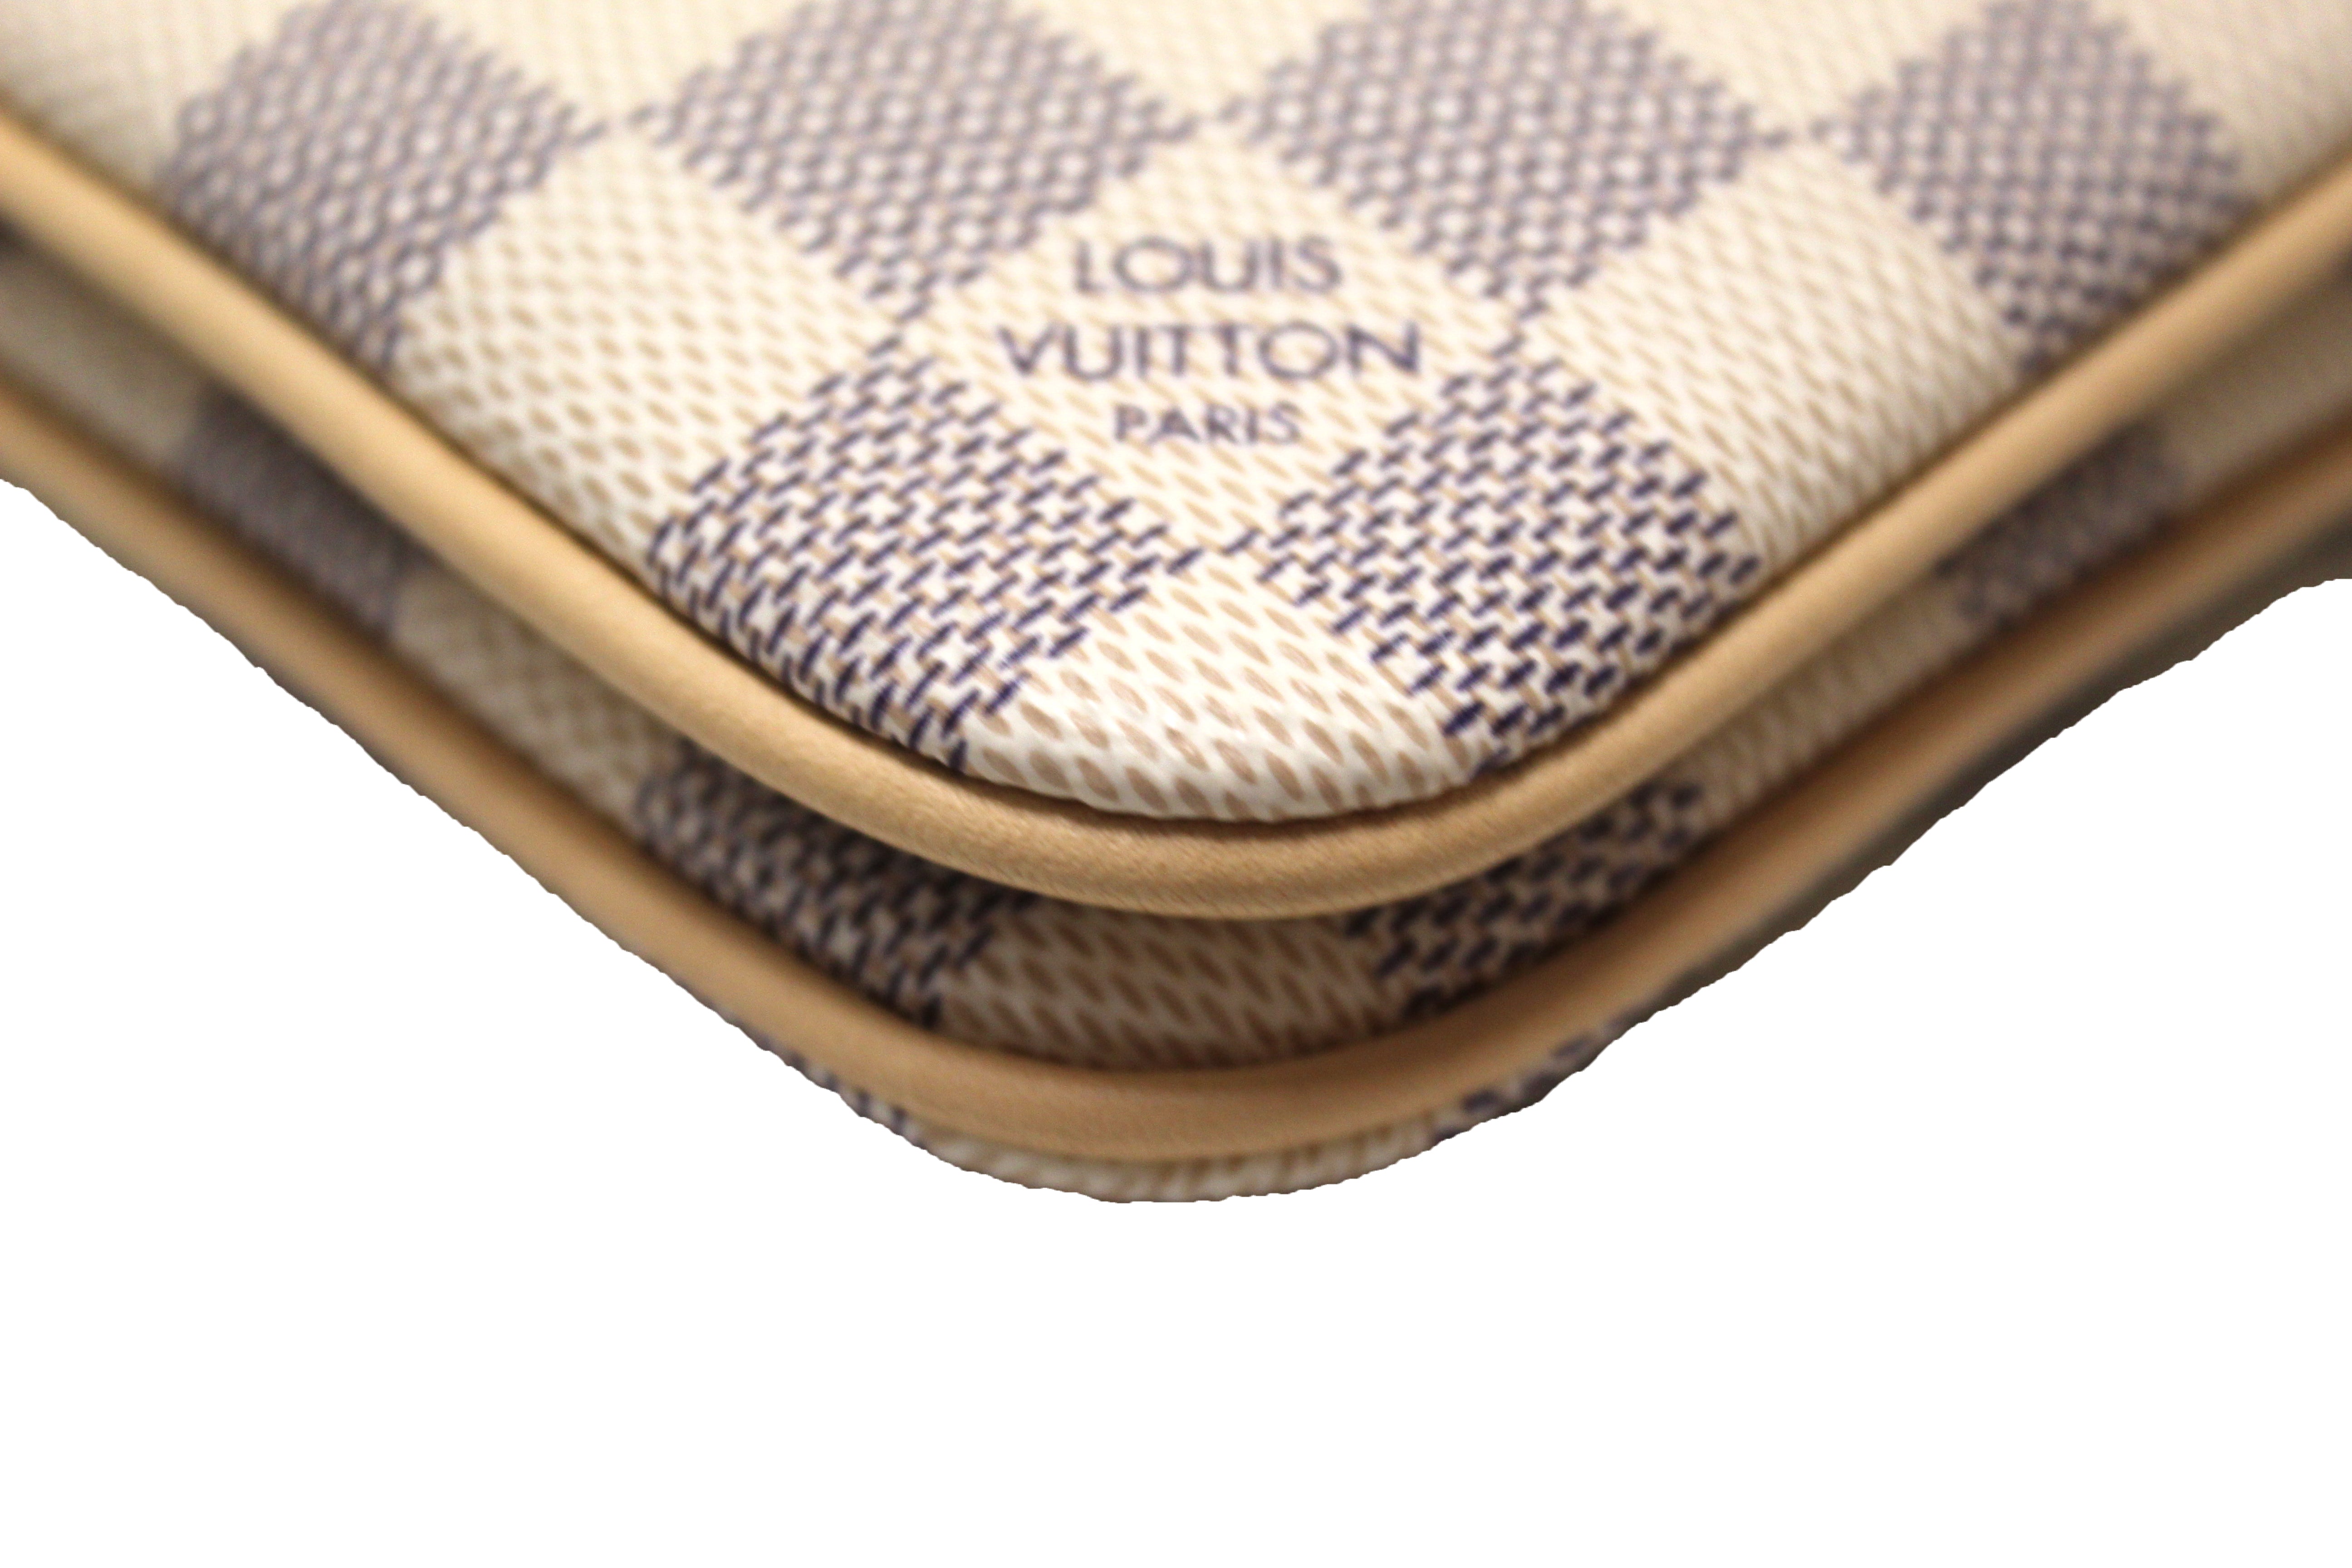 LOUIS VUITTON, Double Zip Pochette, Damier azur canvas, with light  leather details, 2 compartments with zippers, inside a middle compartment,  a smaller compartment and one with space for 3 credit cards, inside